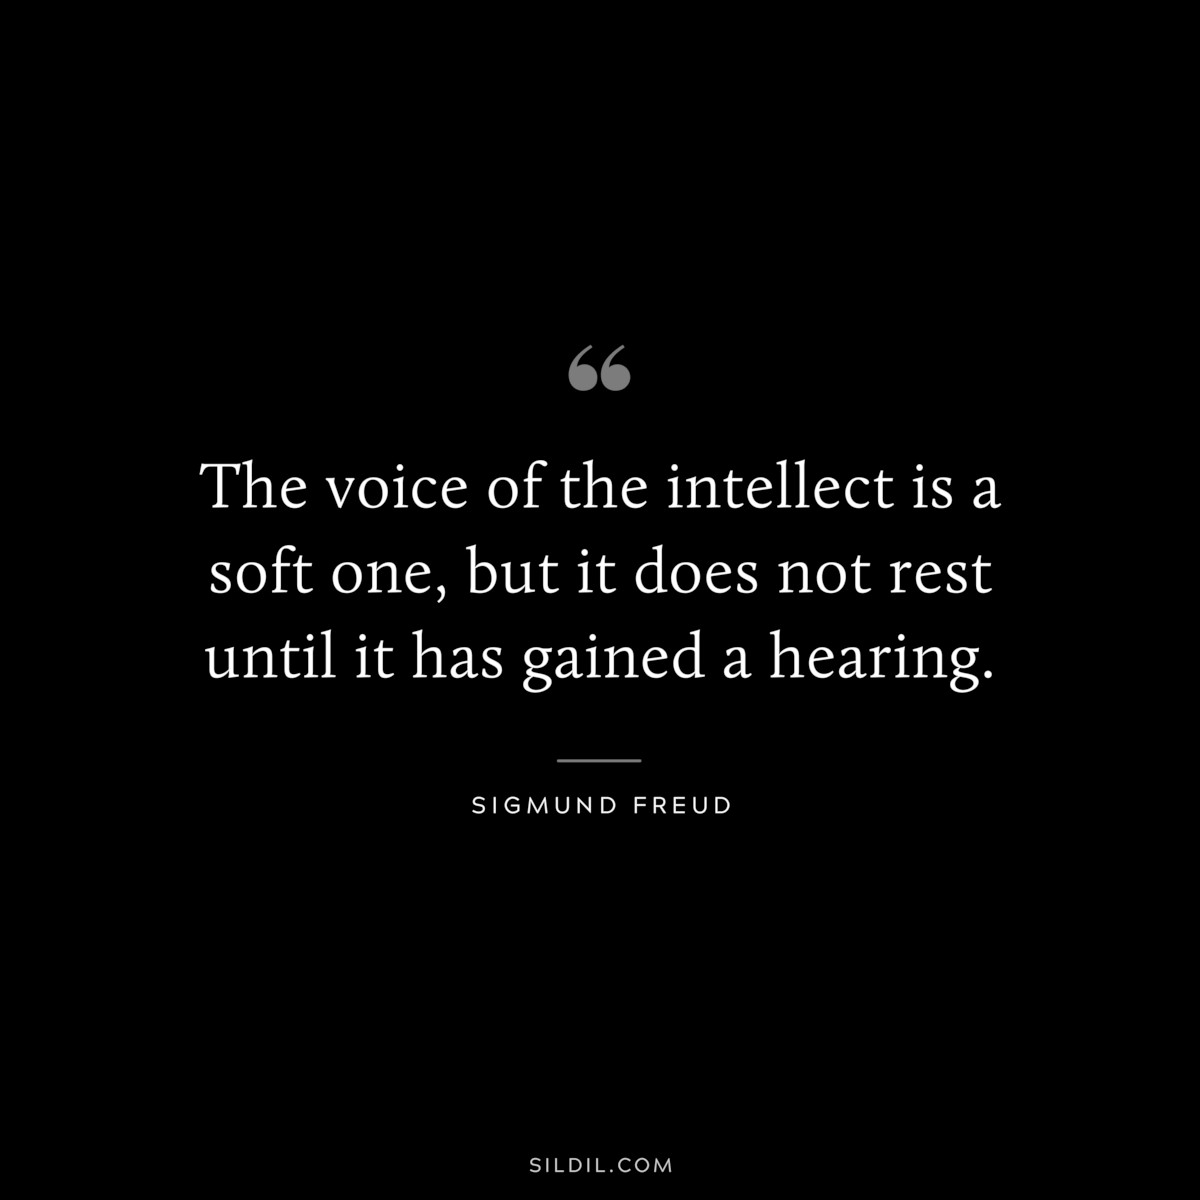 The voice of the intellect is a soft one, but it does not rest until it has gained a hearing. ― Sigmund Frued